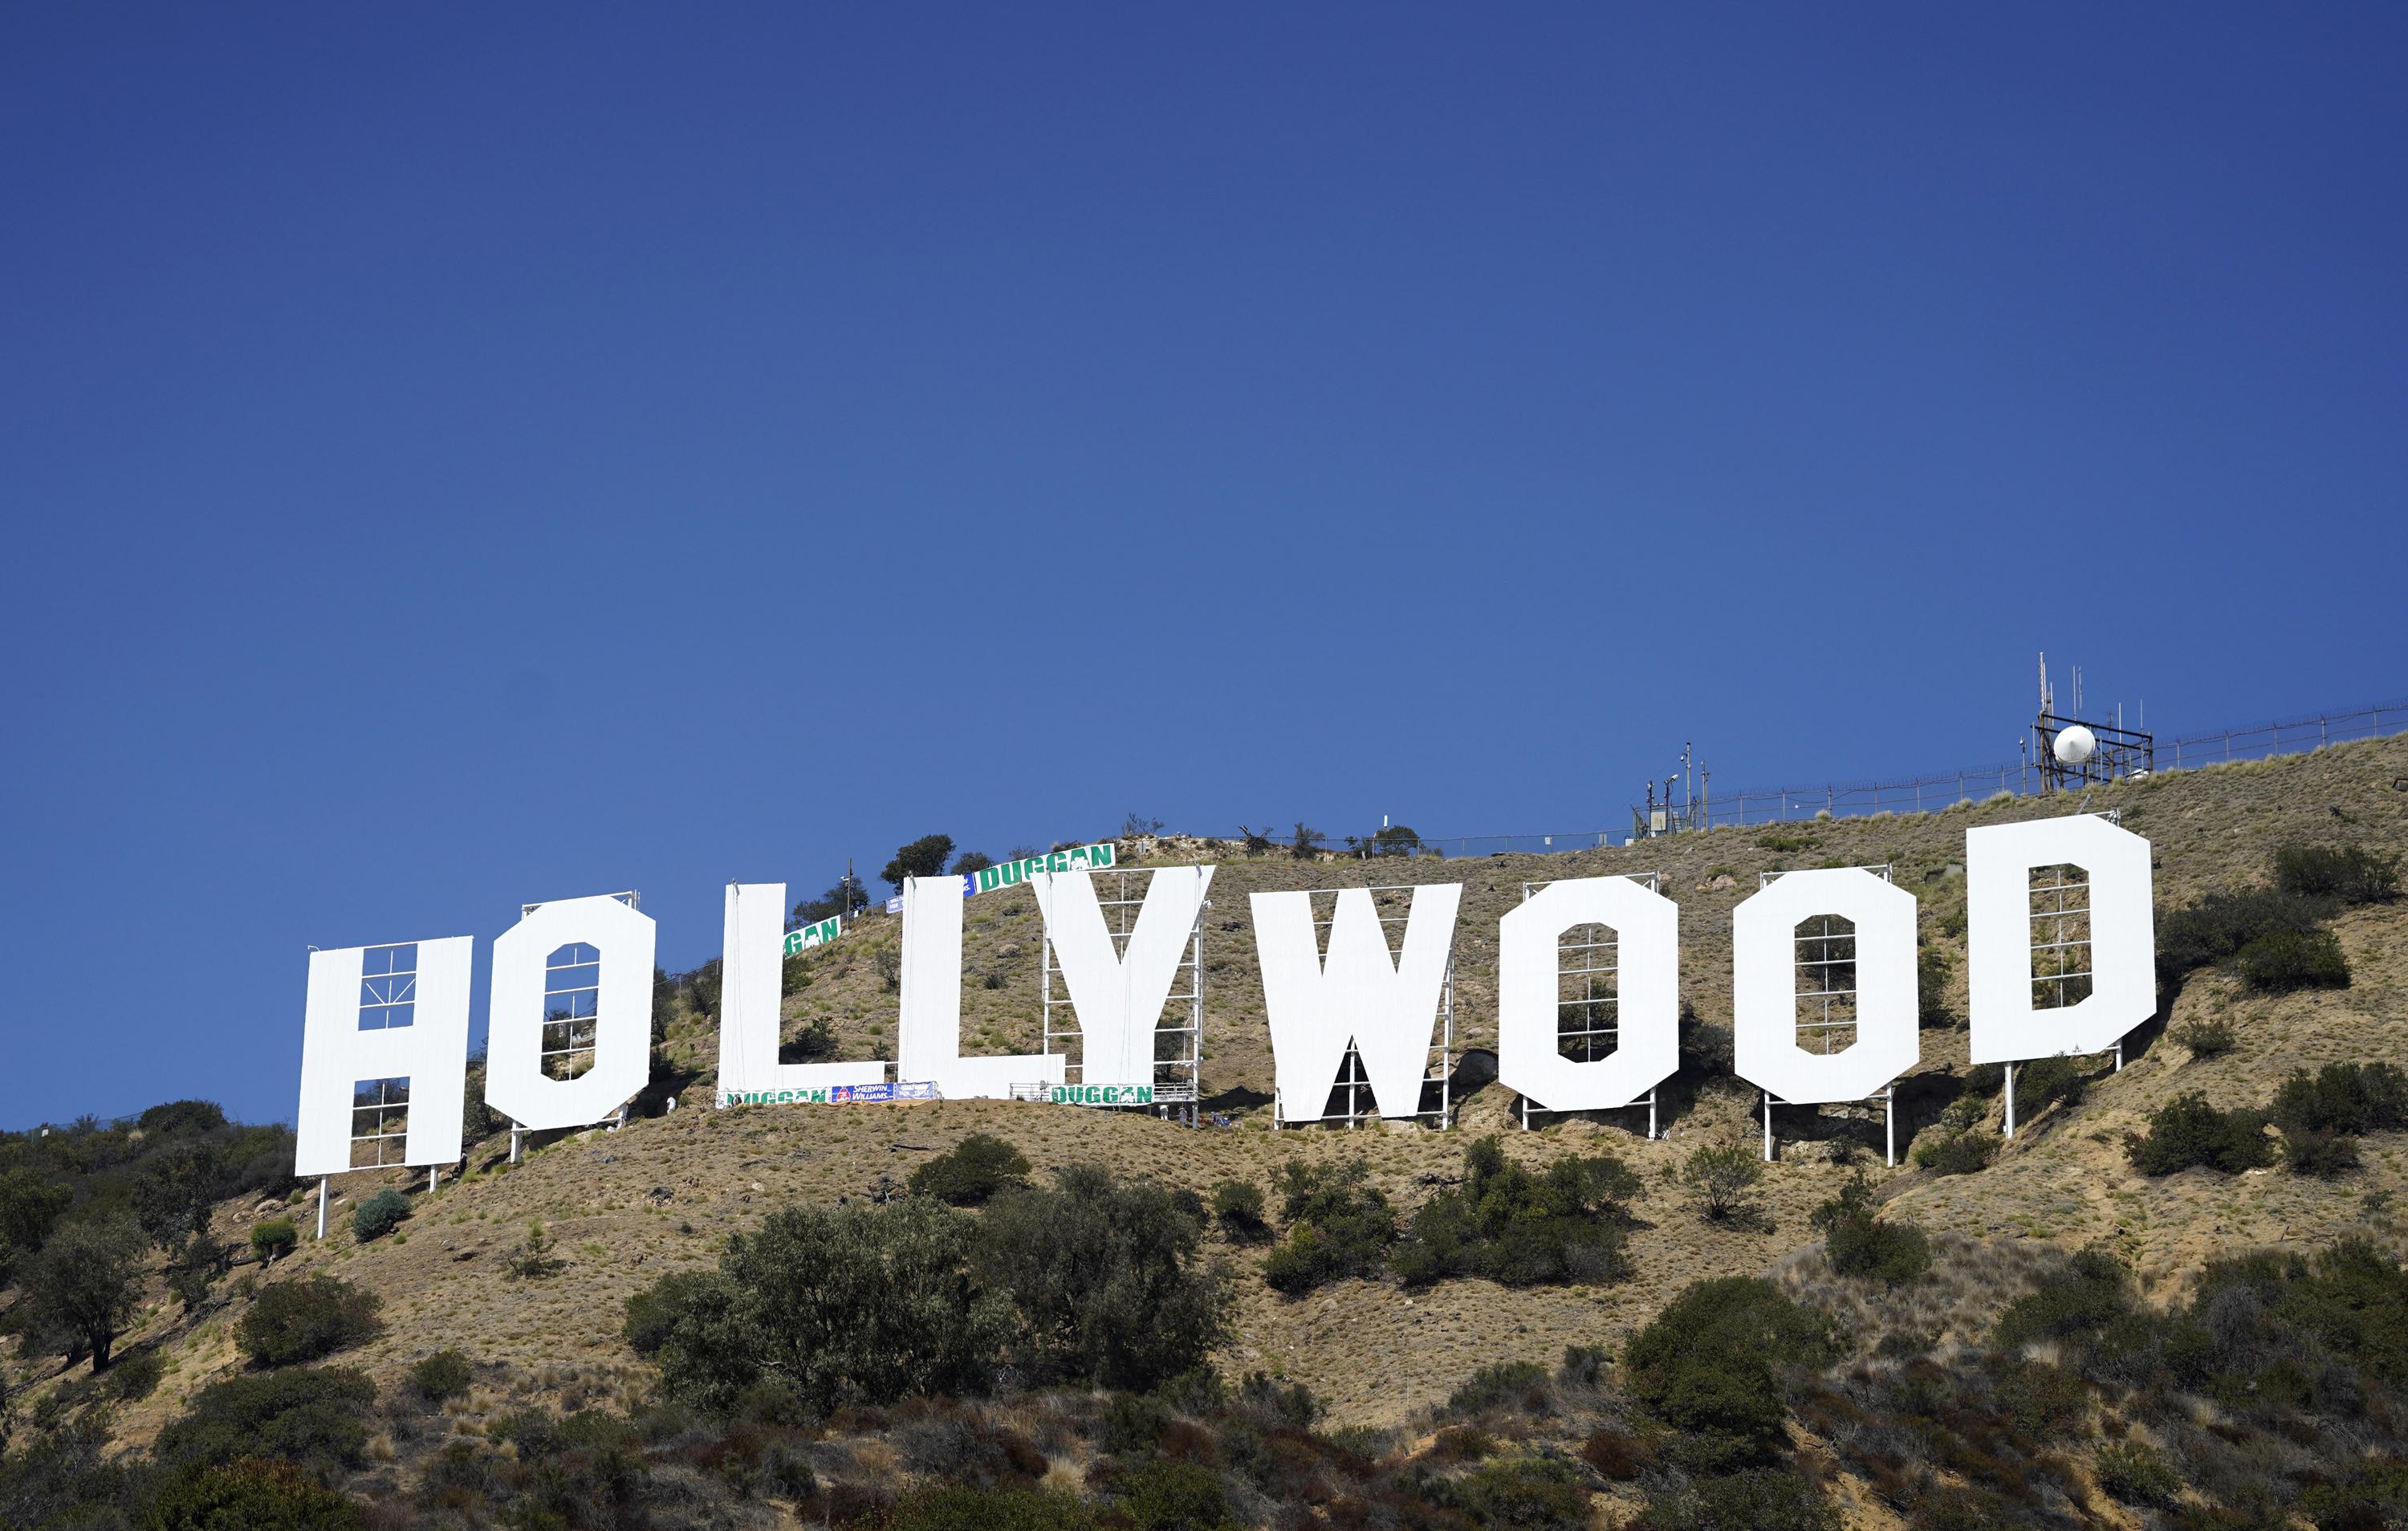 Hollywood sign gets makeover ahead of its centennial in 2023 AP News